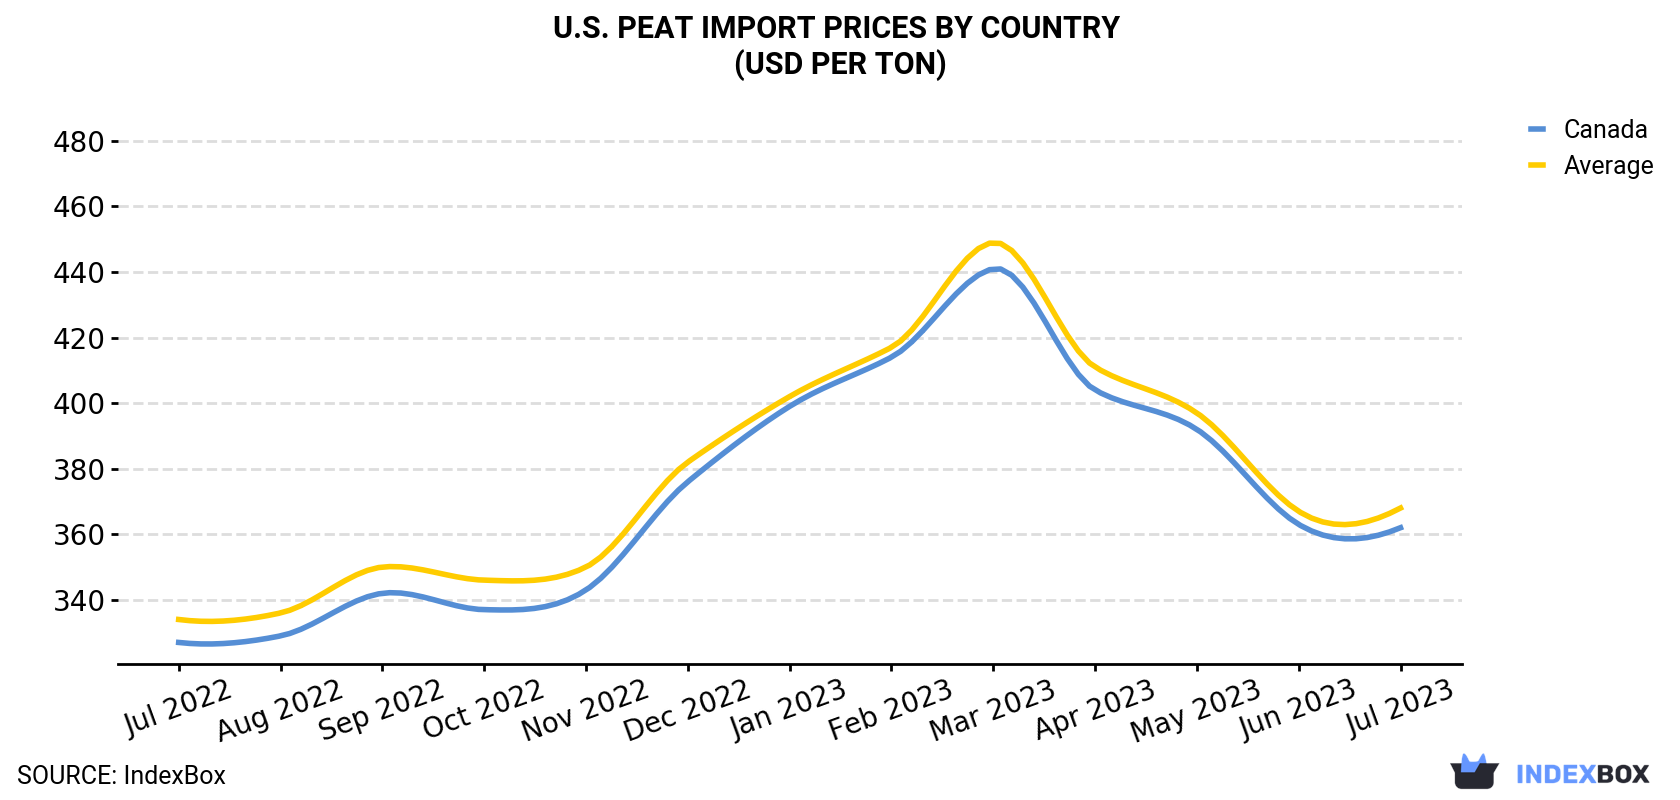 U.S. Peat Import Prices By Country (USD Per Ton)